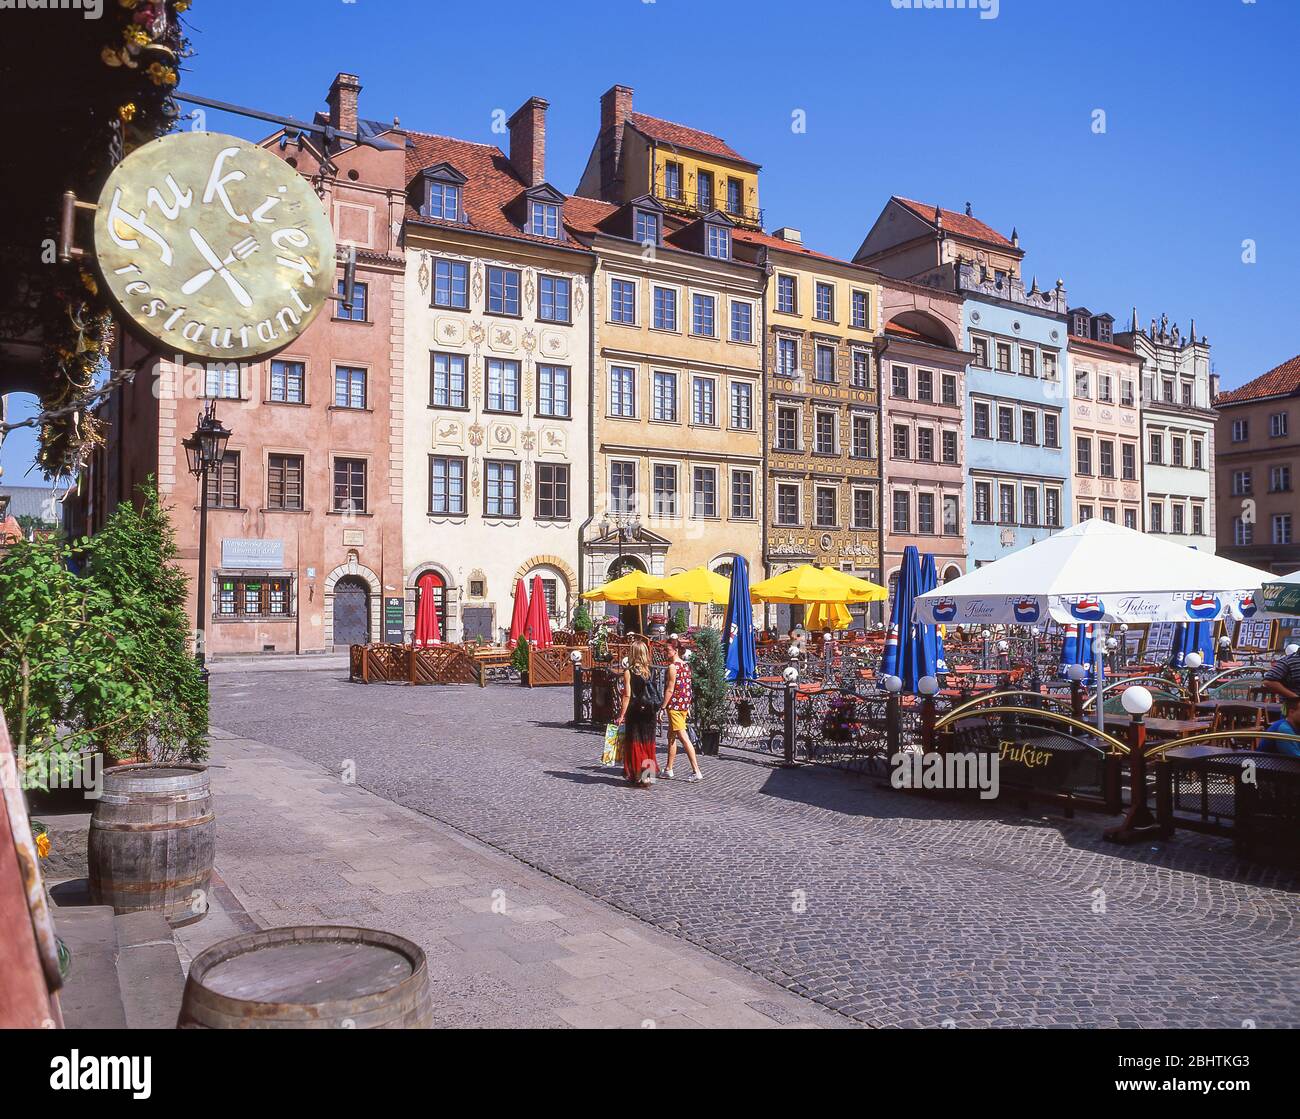 Restaurant in Old Town Market Place, Old Town, Warsaw (Warszawa), Republic of Poland Stock Photo